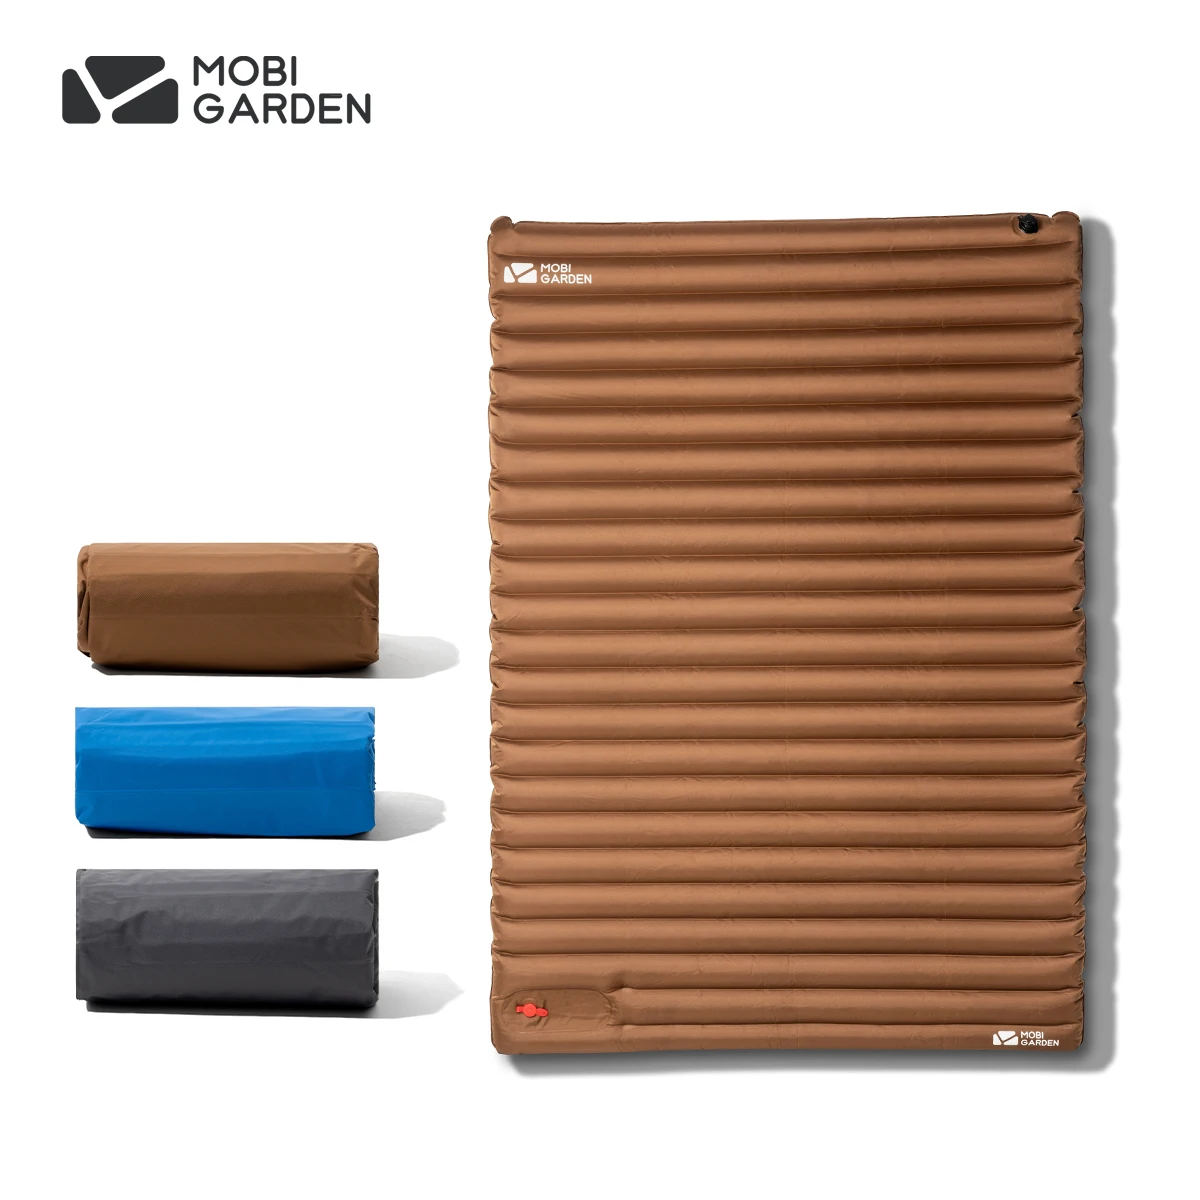 

MOBI GARDEN Single and Double Inflatable Bed Portable Outdoor Camping Moisture-proof Pad Portable Air Mattress Inflatable Pad